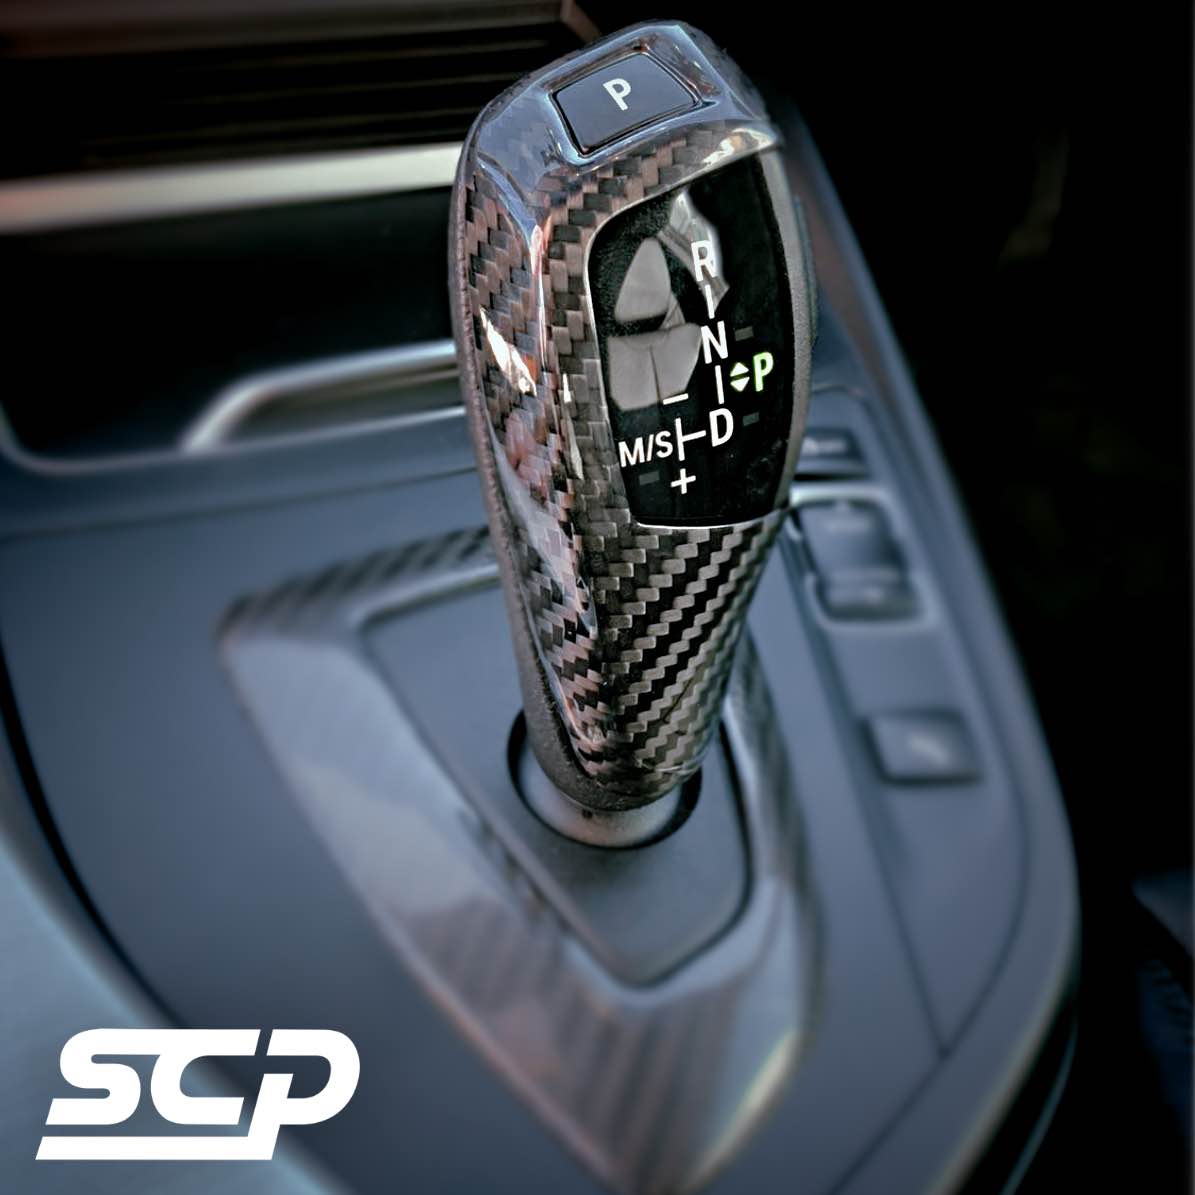 Gear Shift Covers